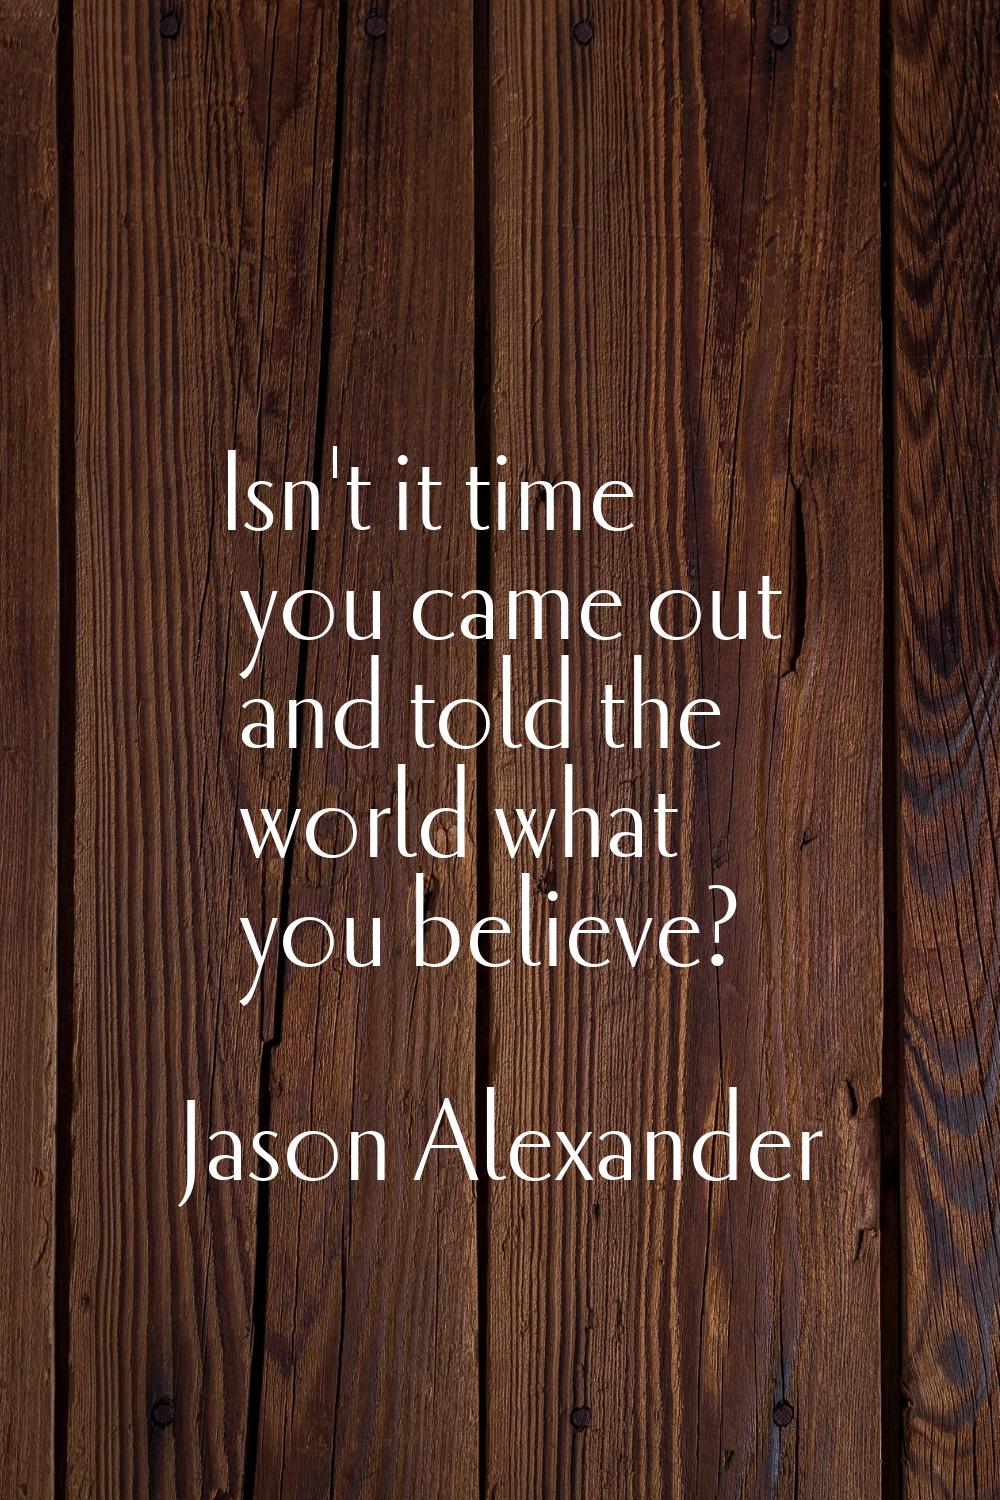 Isn't it time you came out and told the world what you believe?